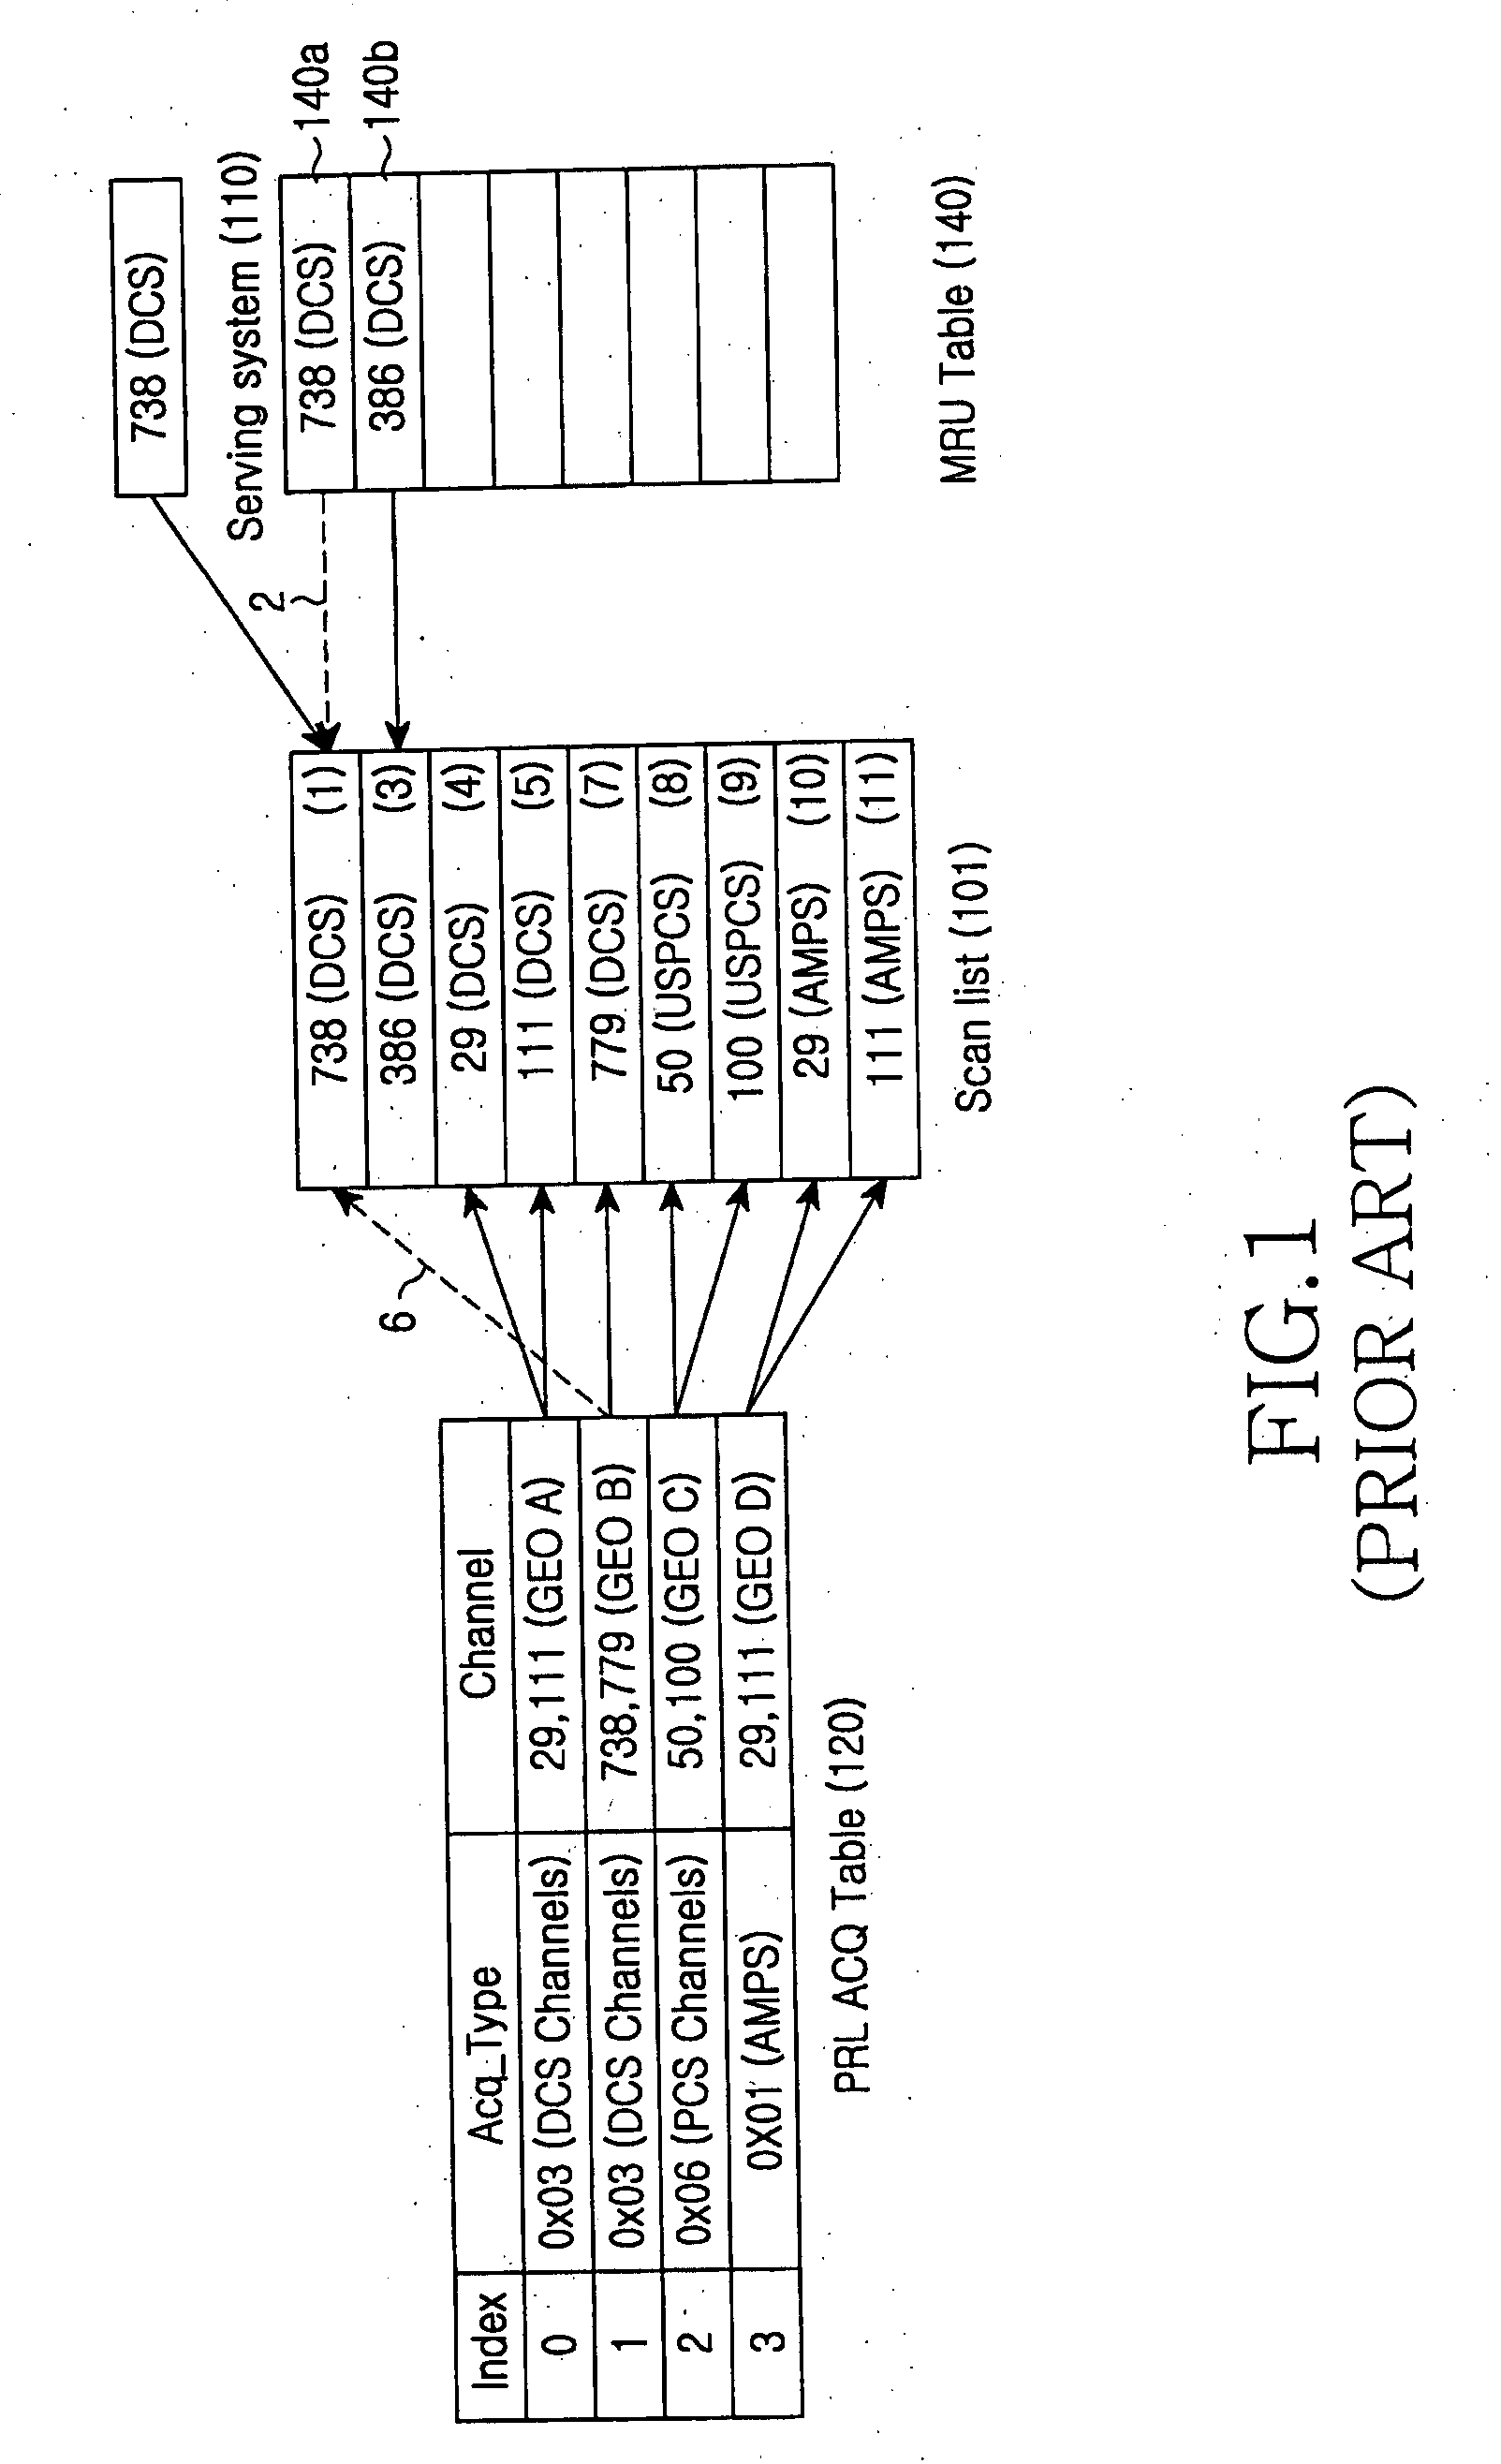 Method for selecting system in a mobile terminal